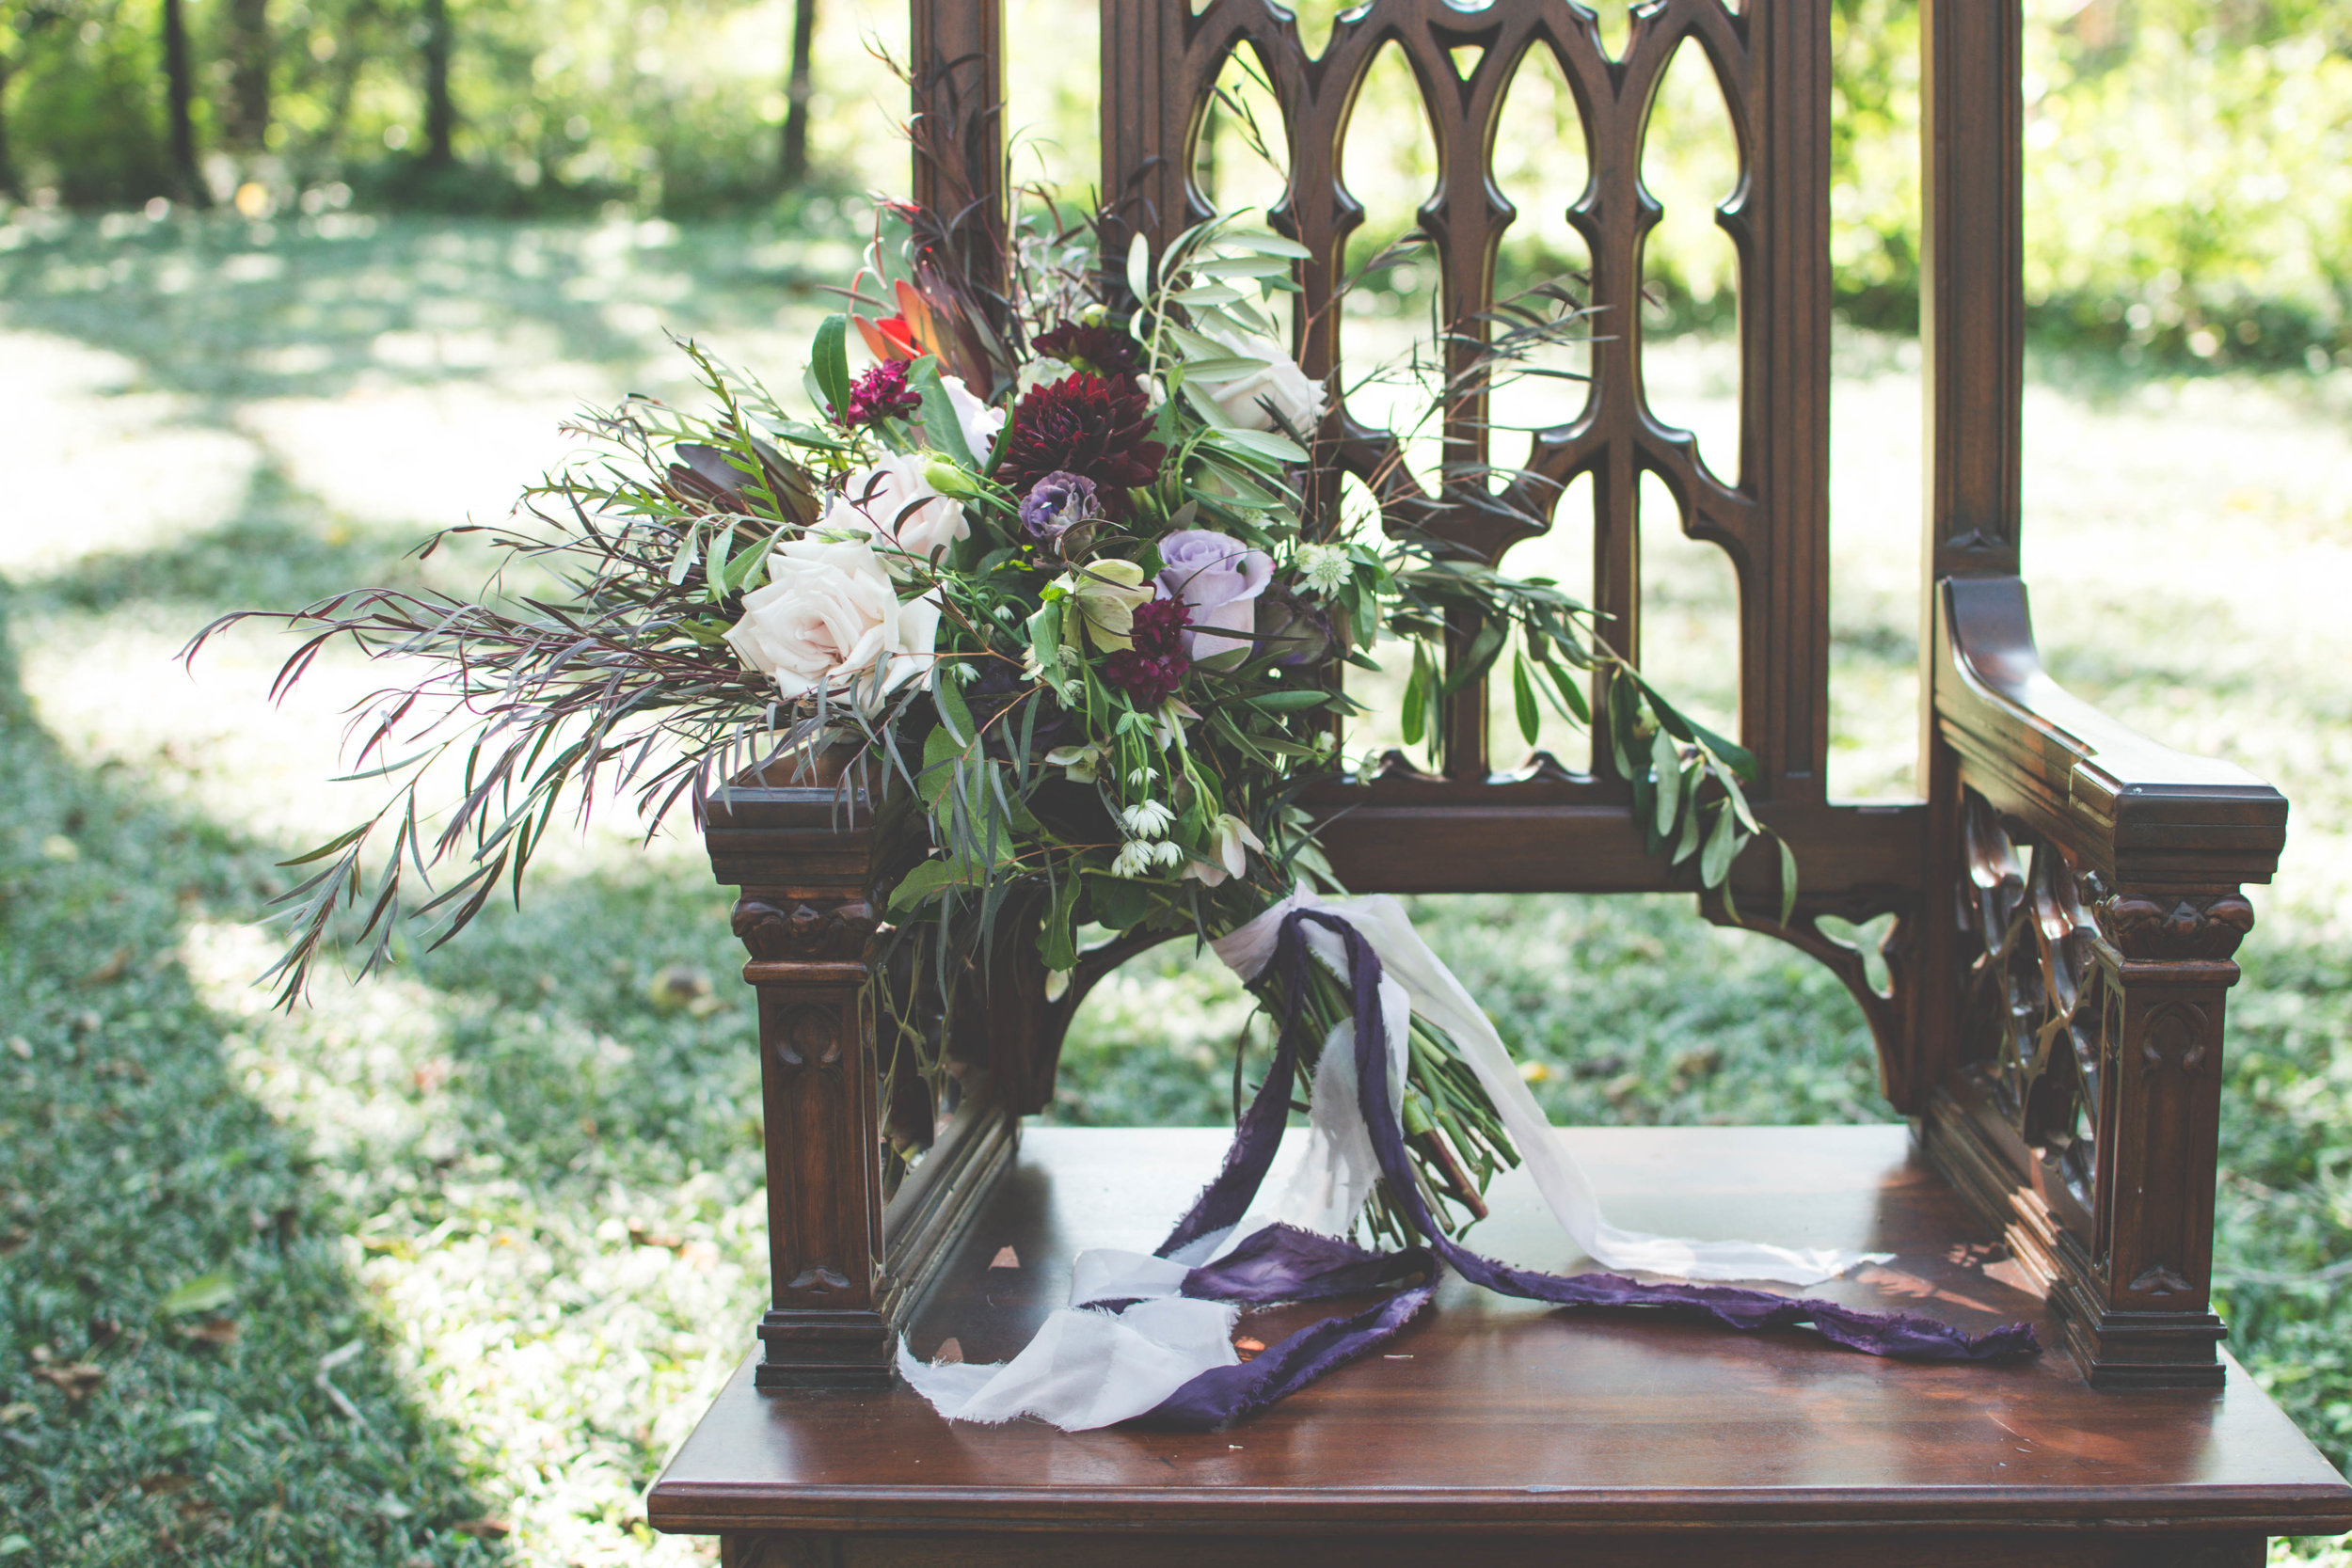 Antique Chair Decor for Halloween Inspired Wedding